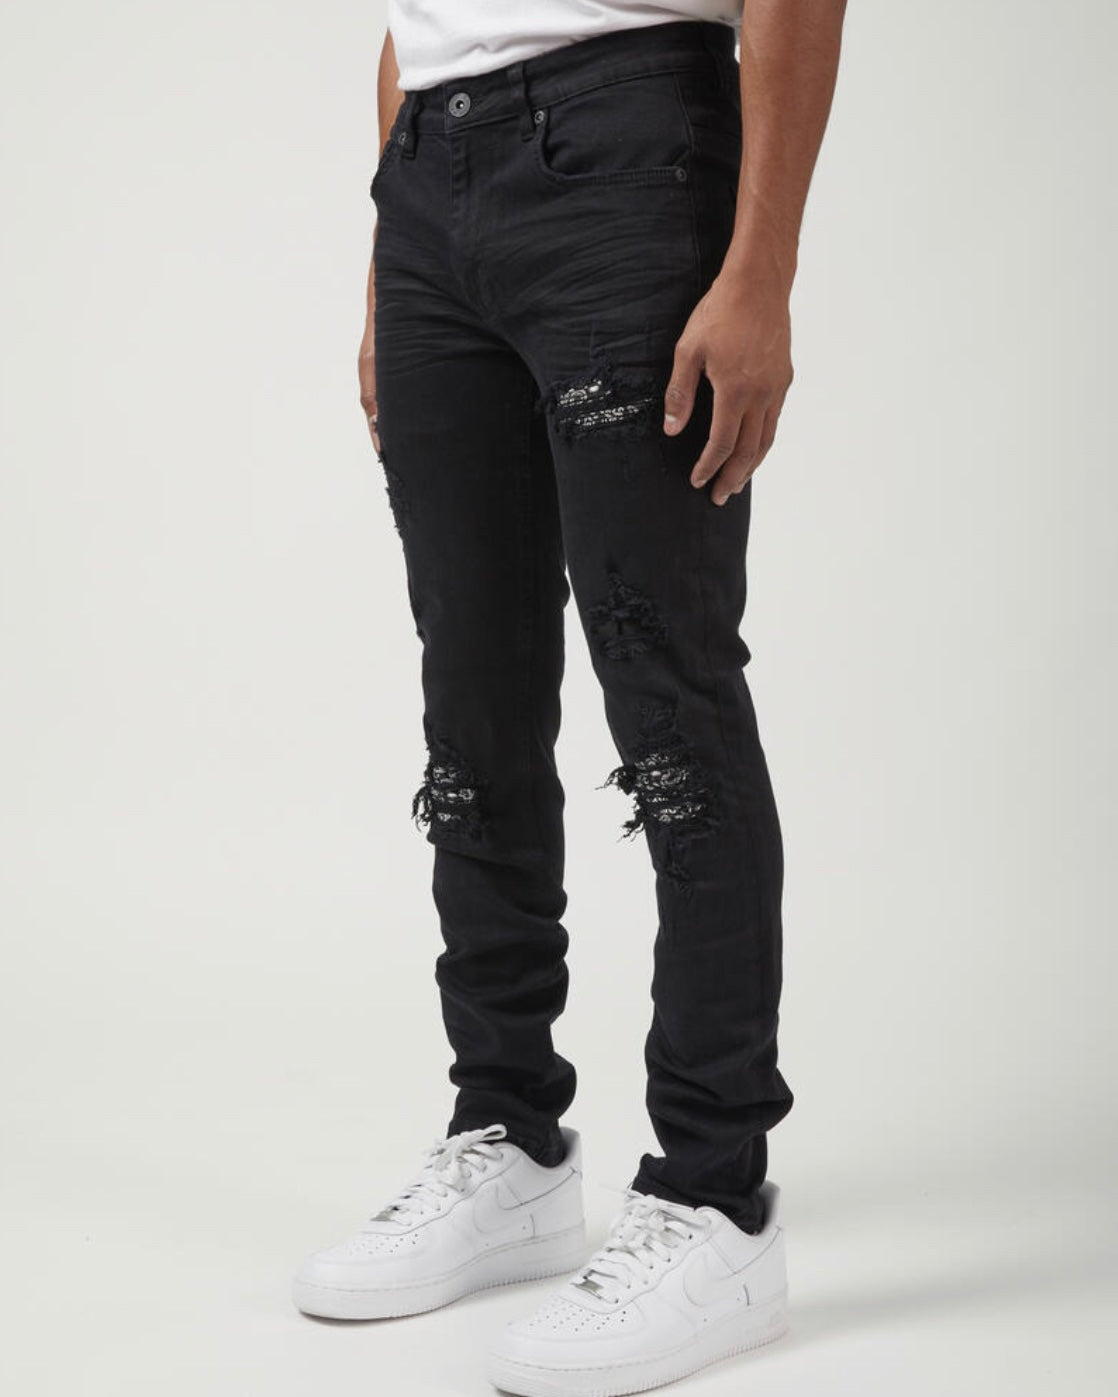 Paisley Patched Rip Jeans